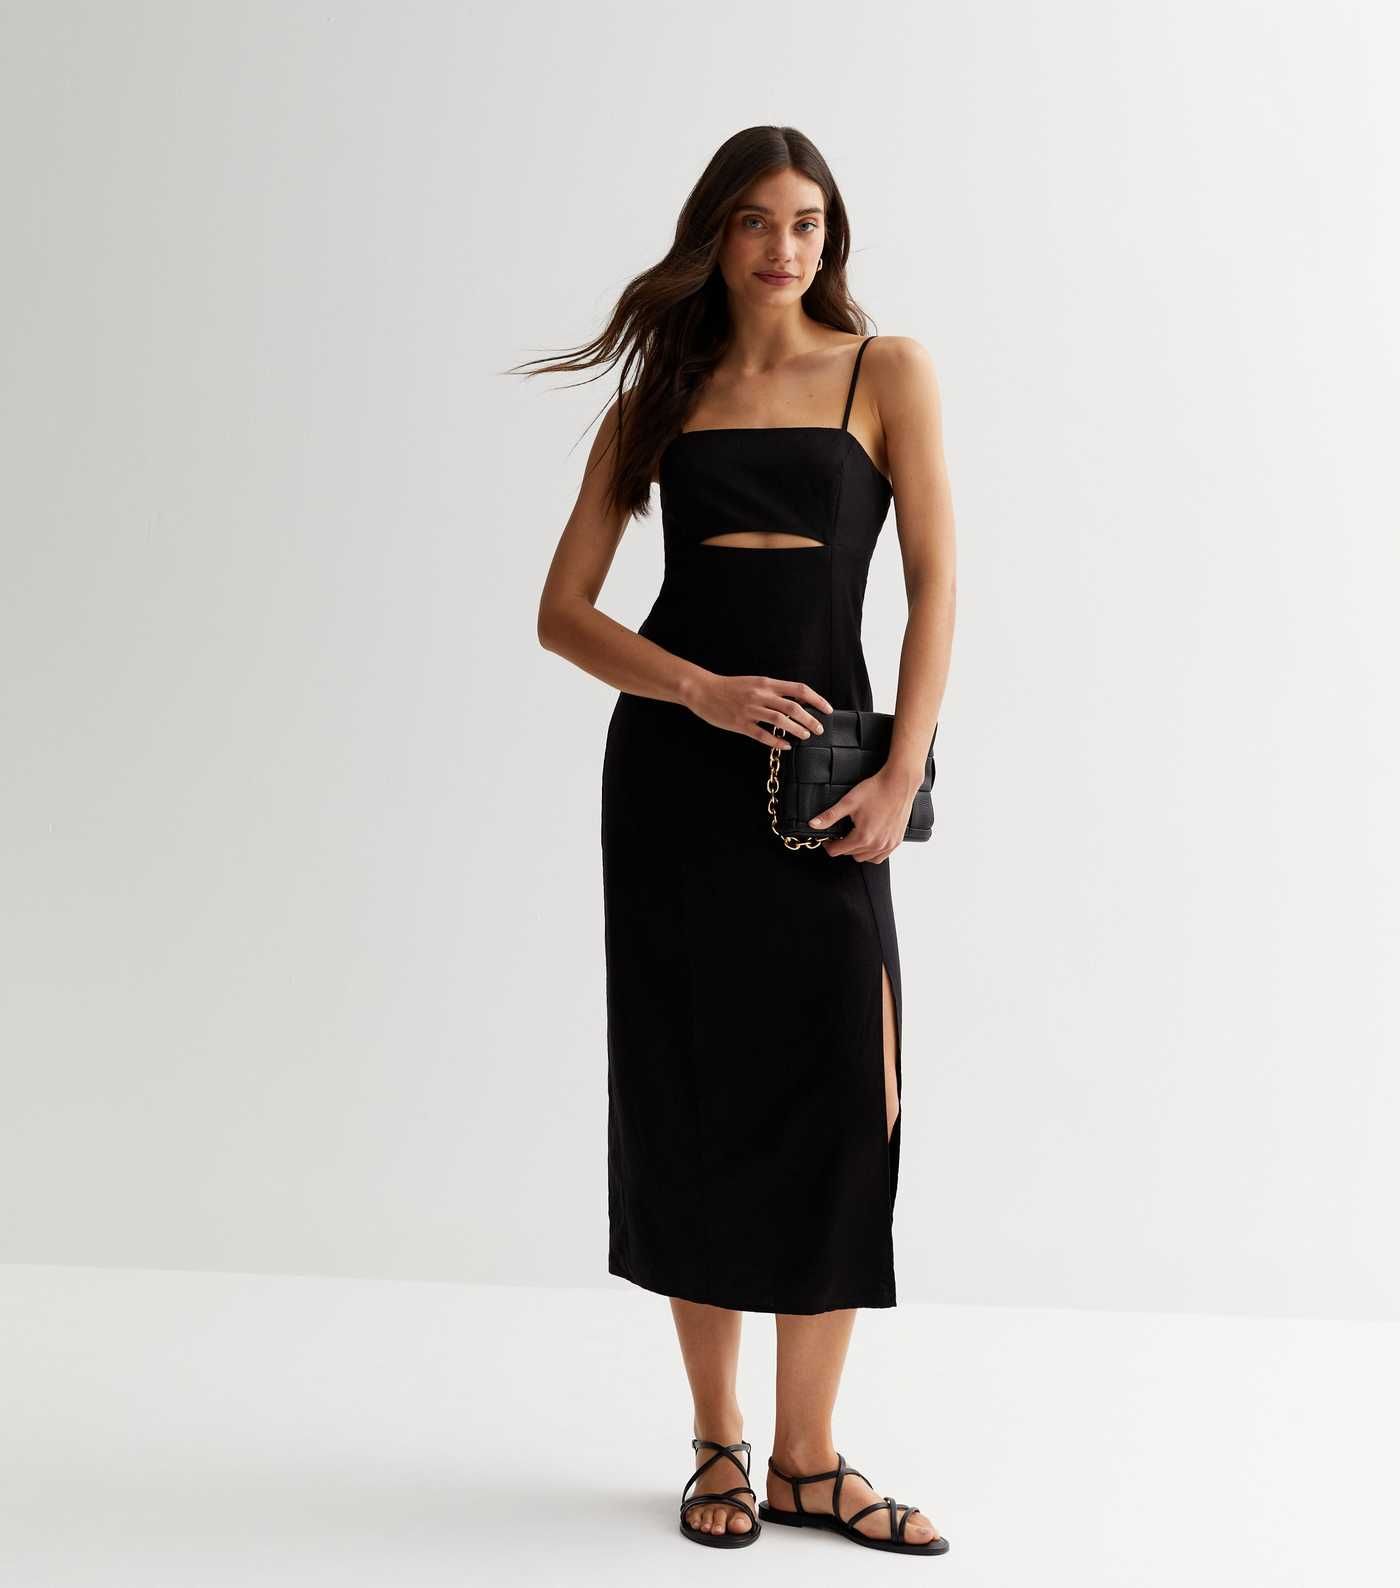 Black Strappy Cut Out Midi Dress
						
						Add to Saved Items
						Remove from Saved Items | New Look (UK)